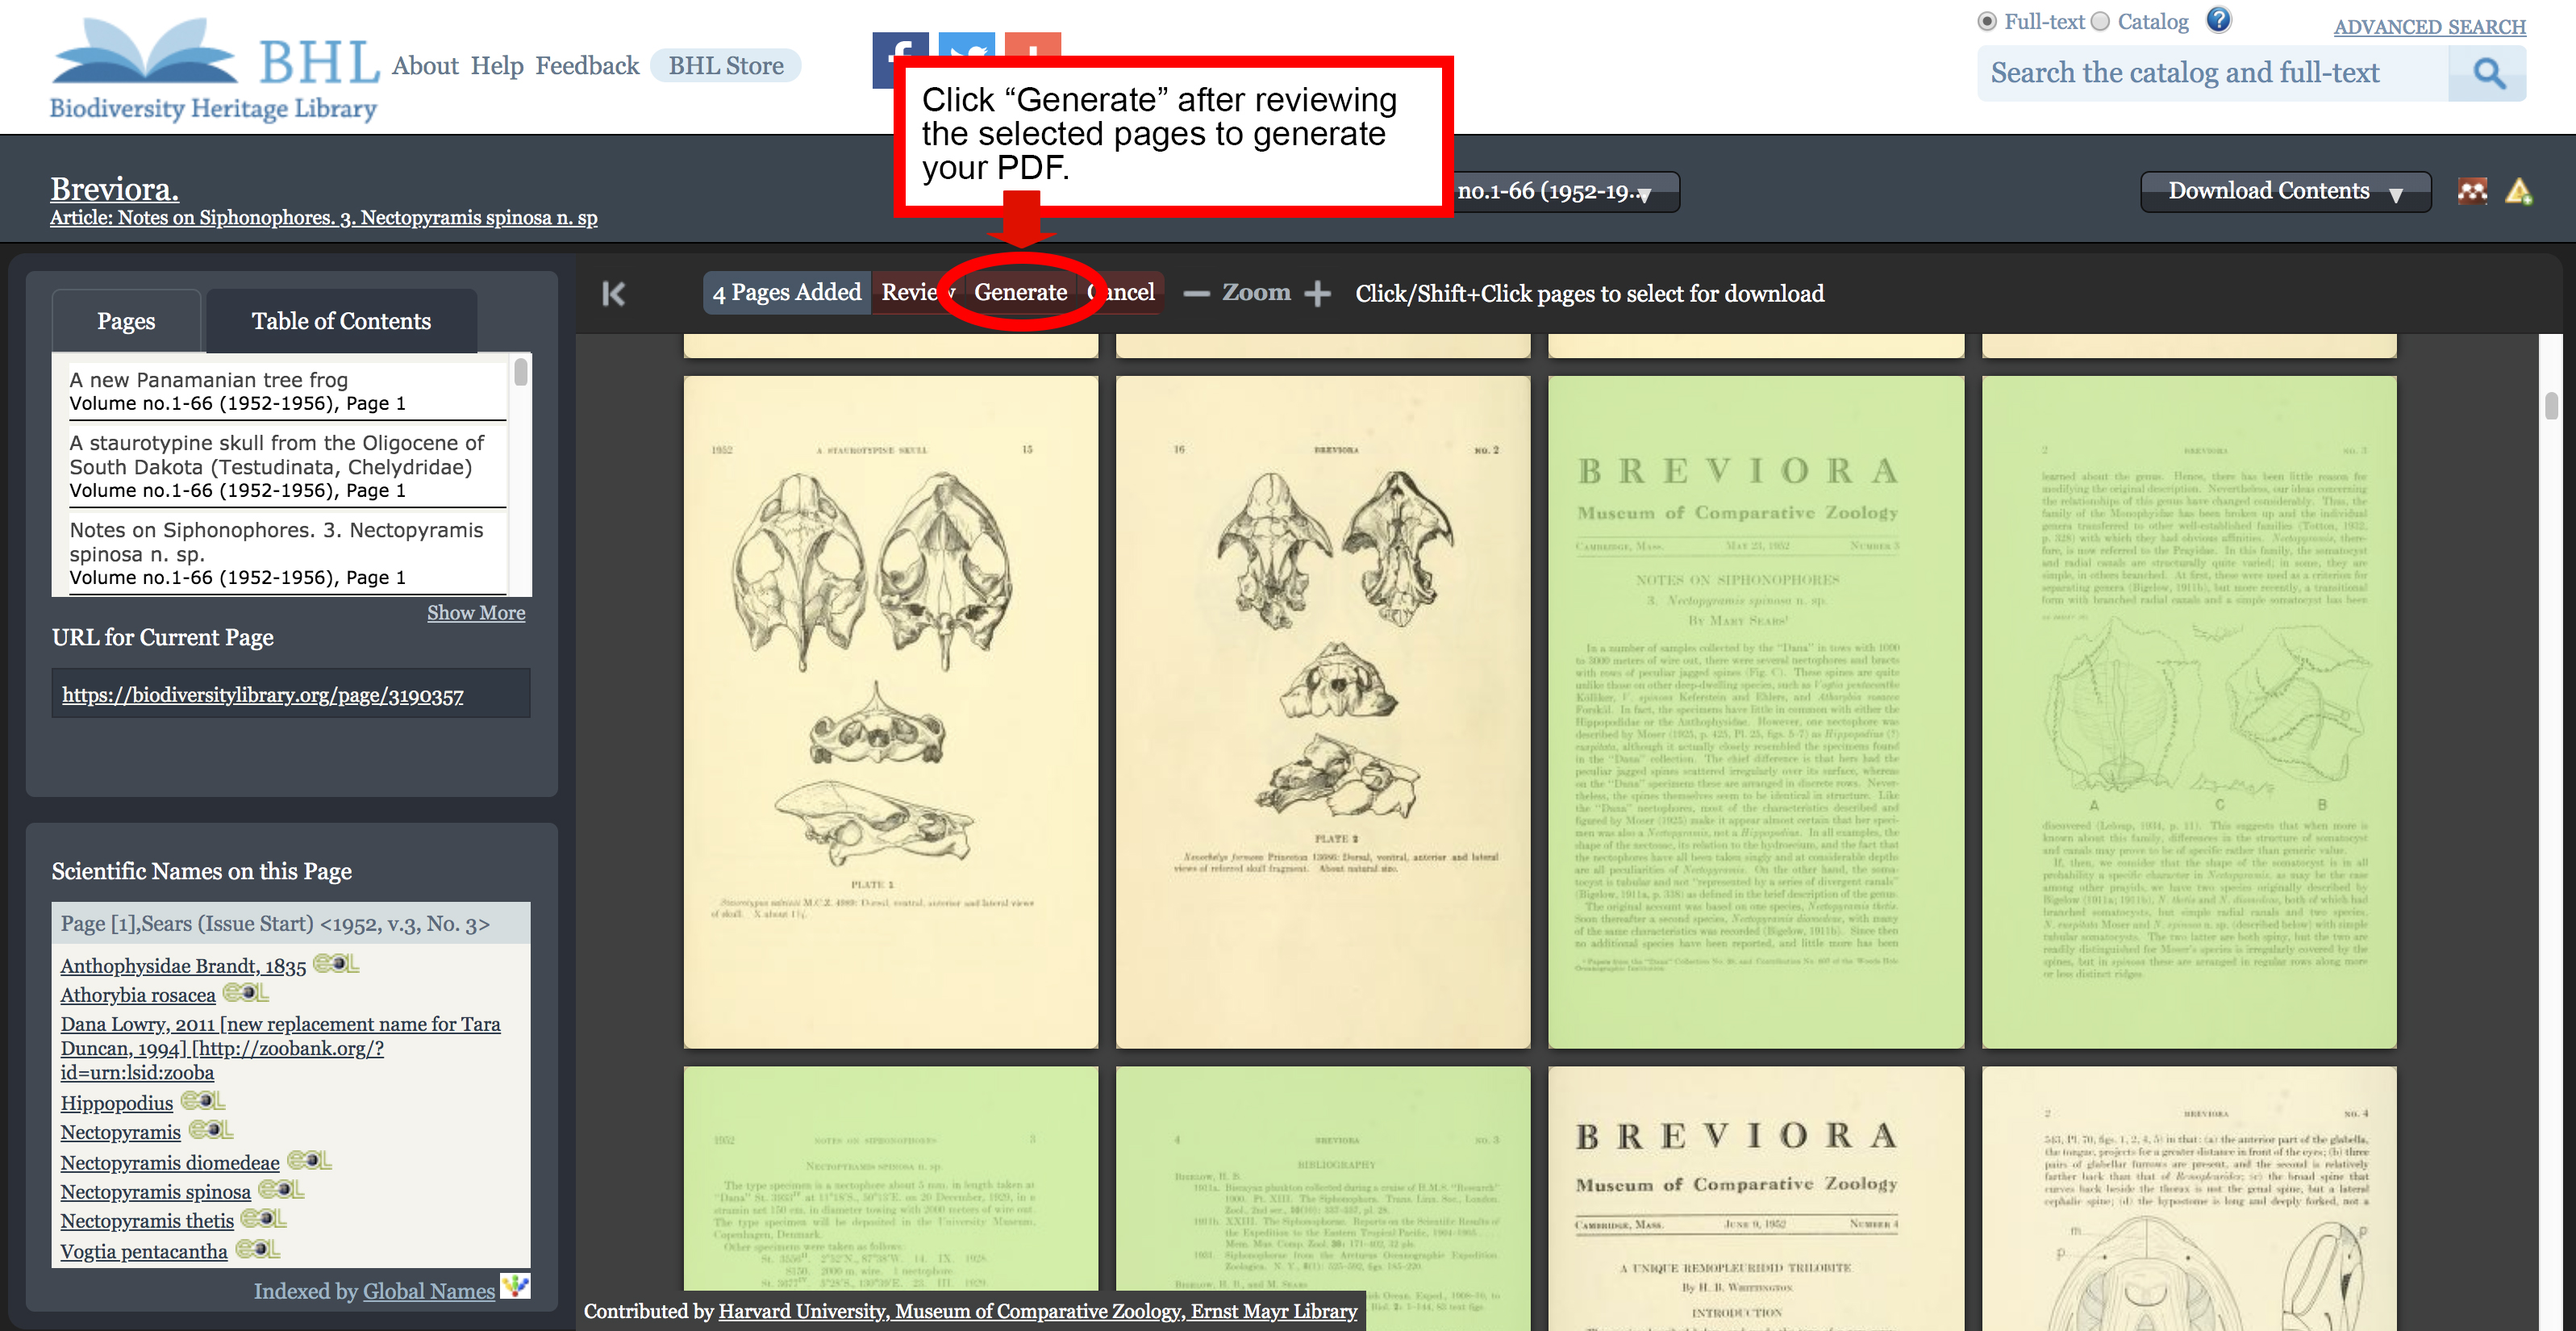 Screenshot of the book viewer in the Biodiversity Heritage Library with the 